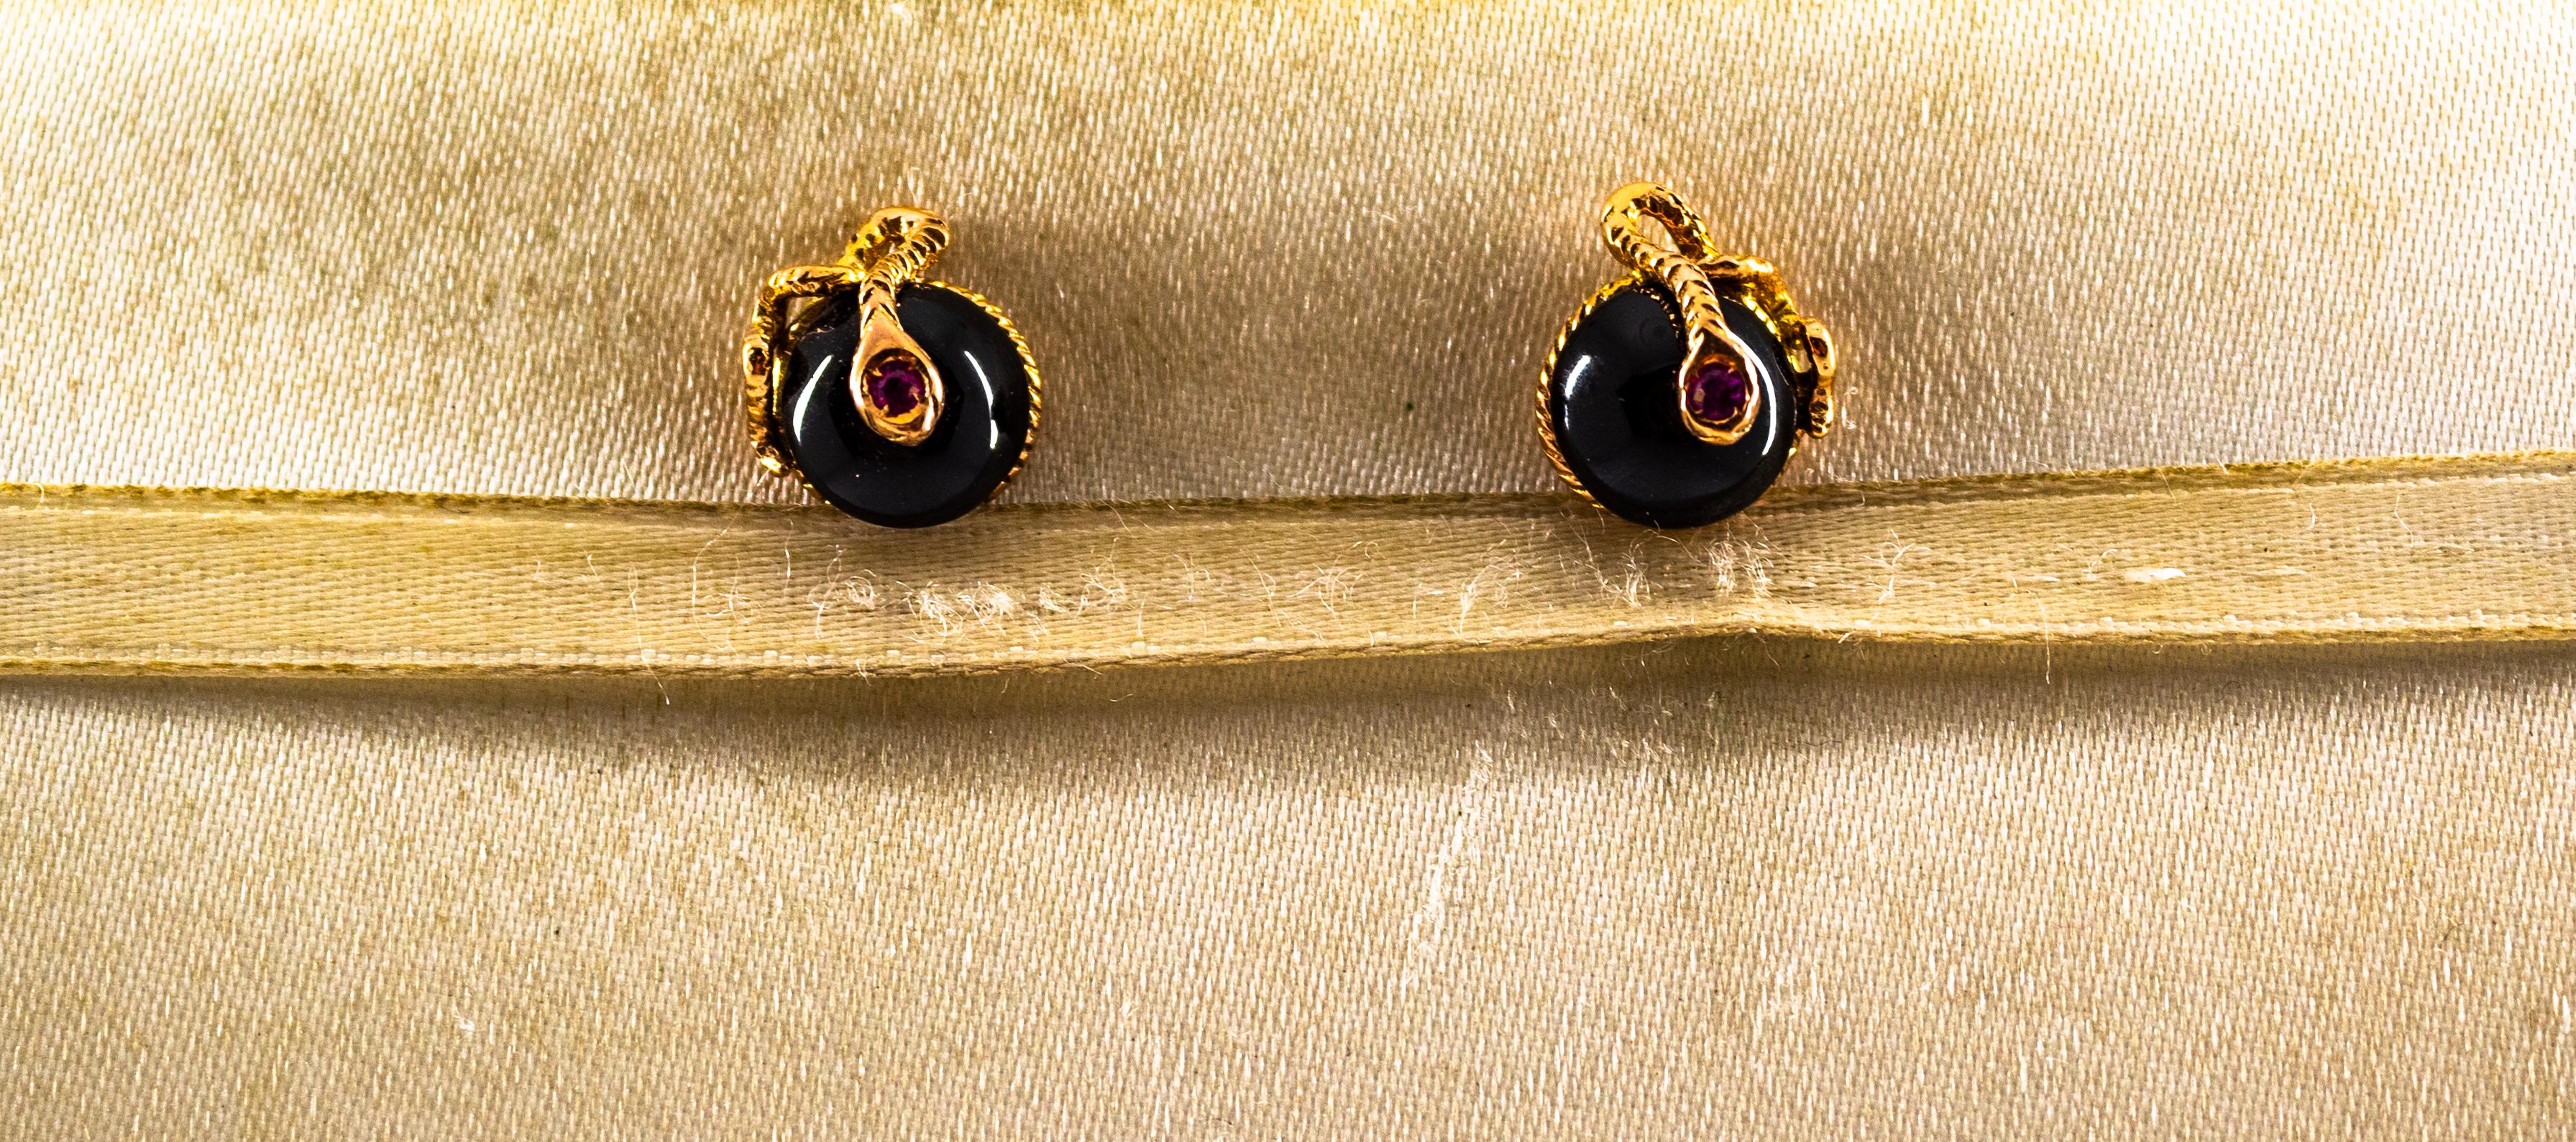 These Earrings are made of 9K Yellow Gold.
These Earrings have 0.08 Carats of Rubies.
These Earrings have two Onyxes.
These Earrings are available also with Pearls.

These Earrings are inspired by Art Nouveau.

All our Earrings have pins for pierced